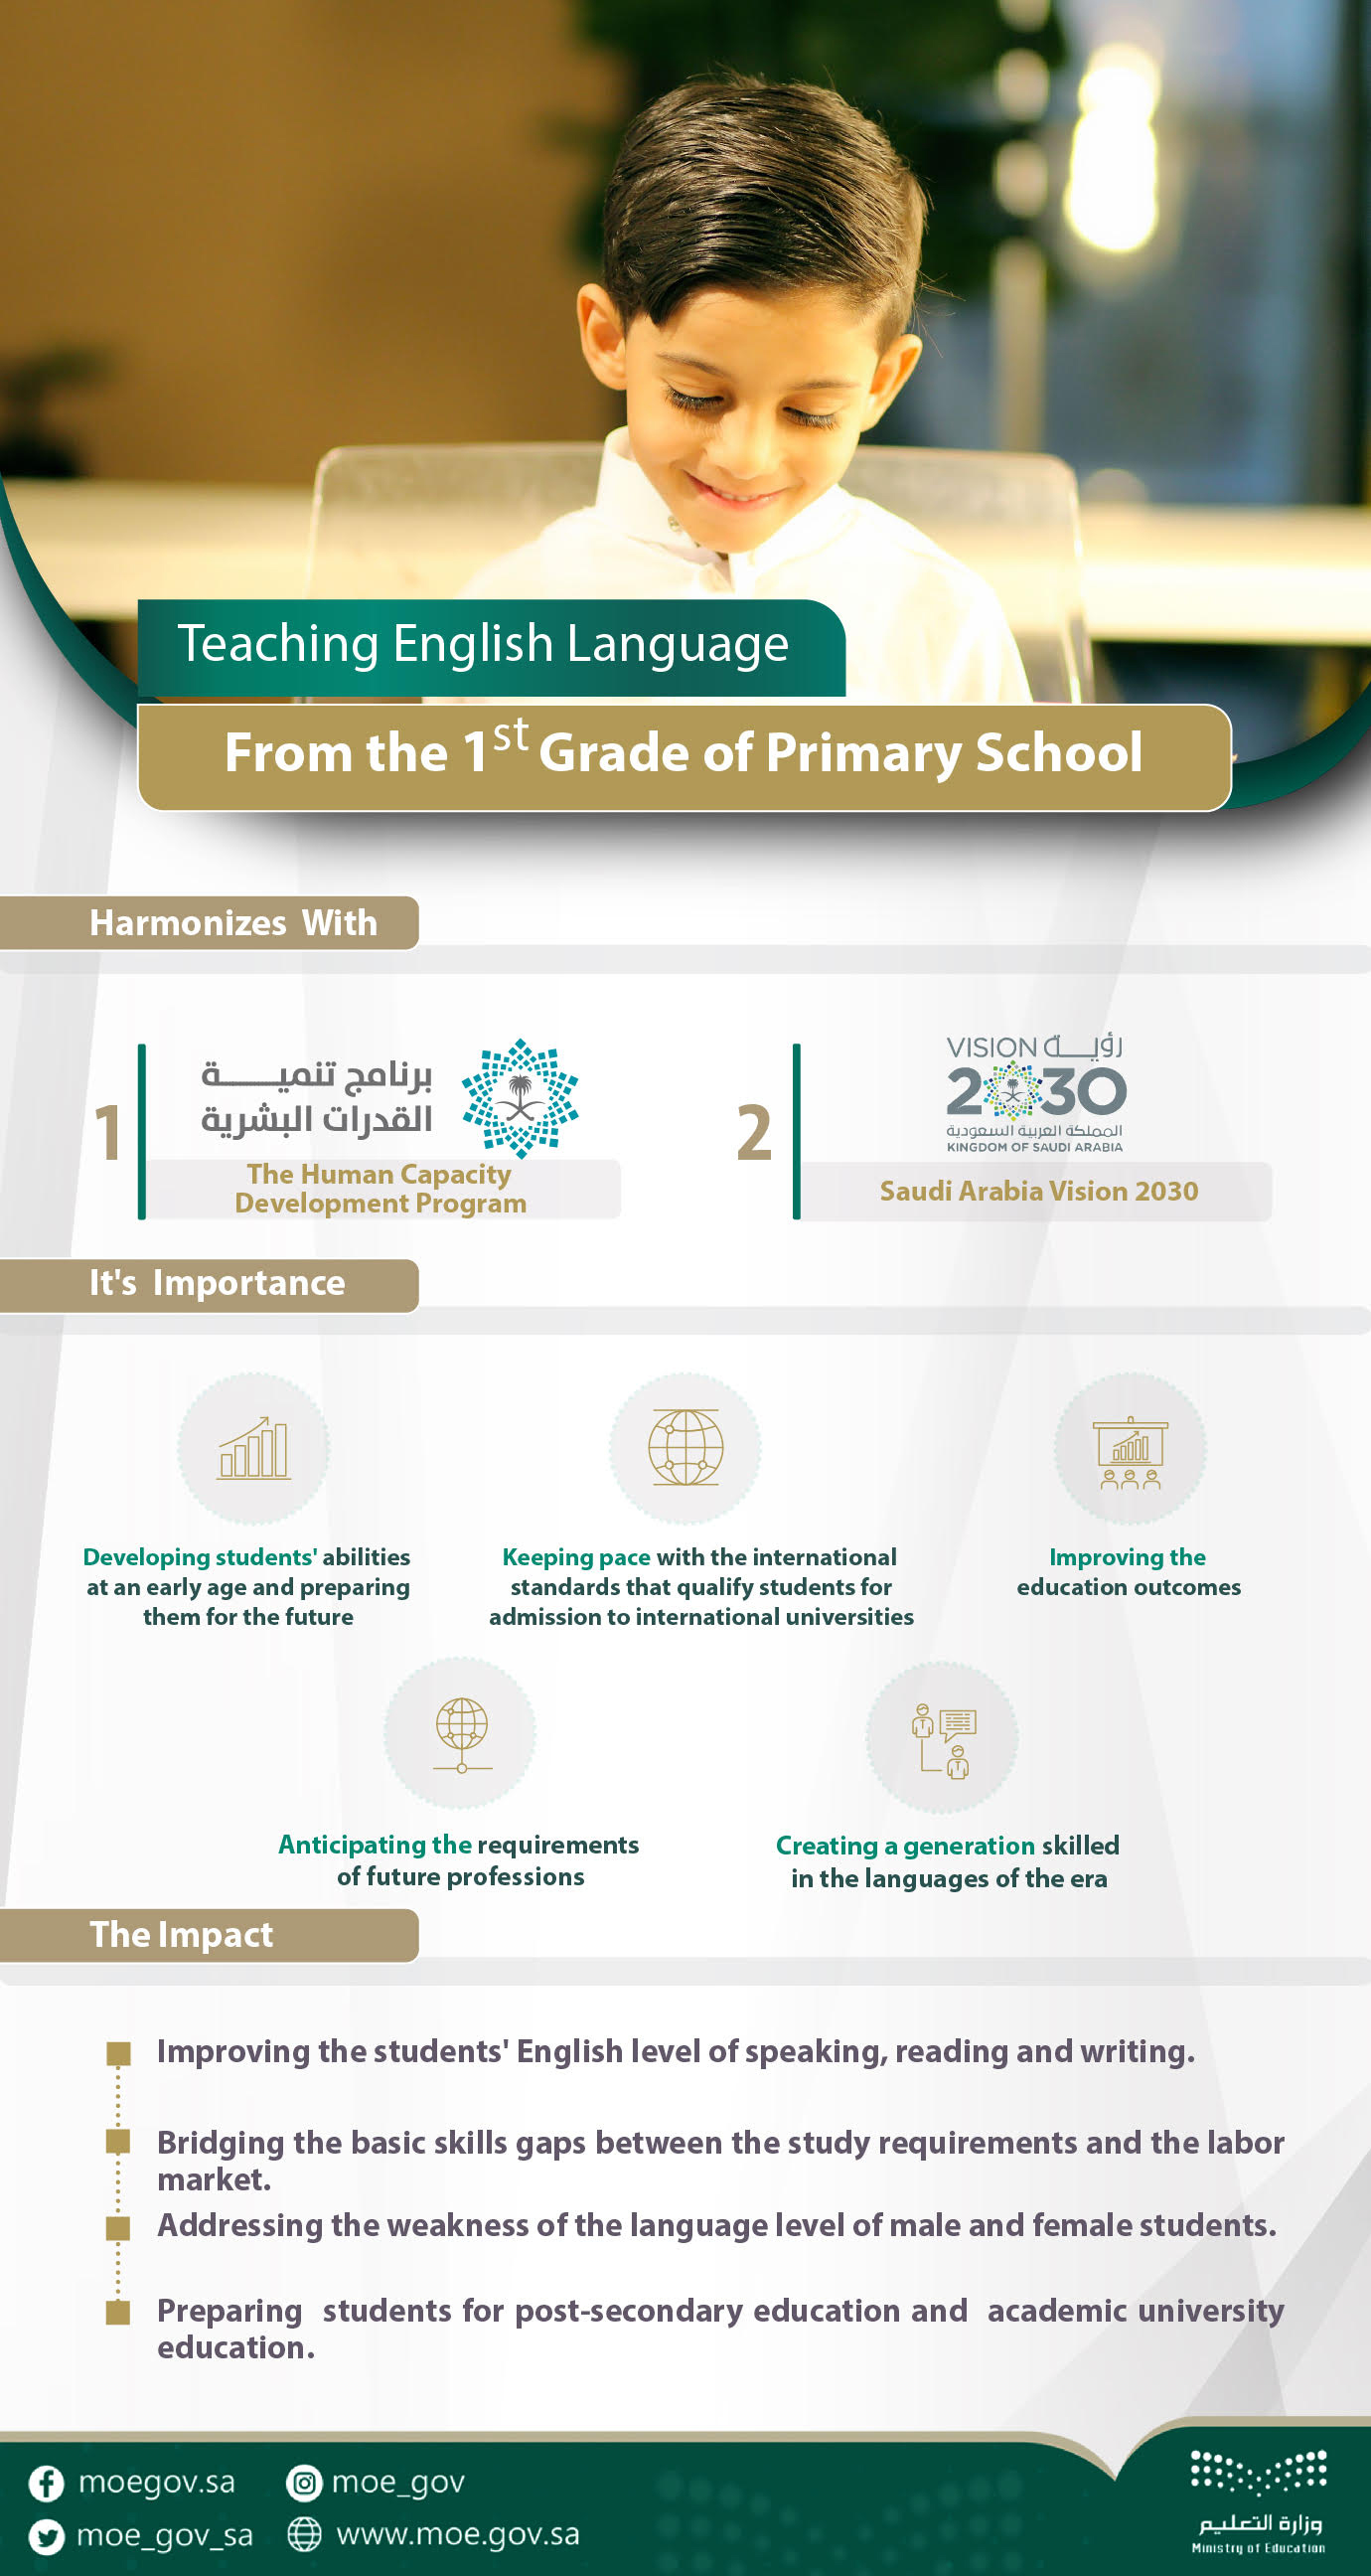 The Ministry of Education has introduced teaching English from the first grade of primary school